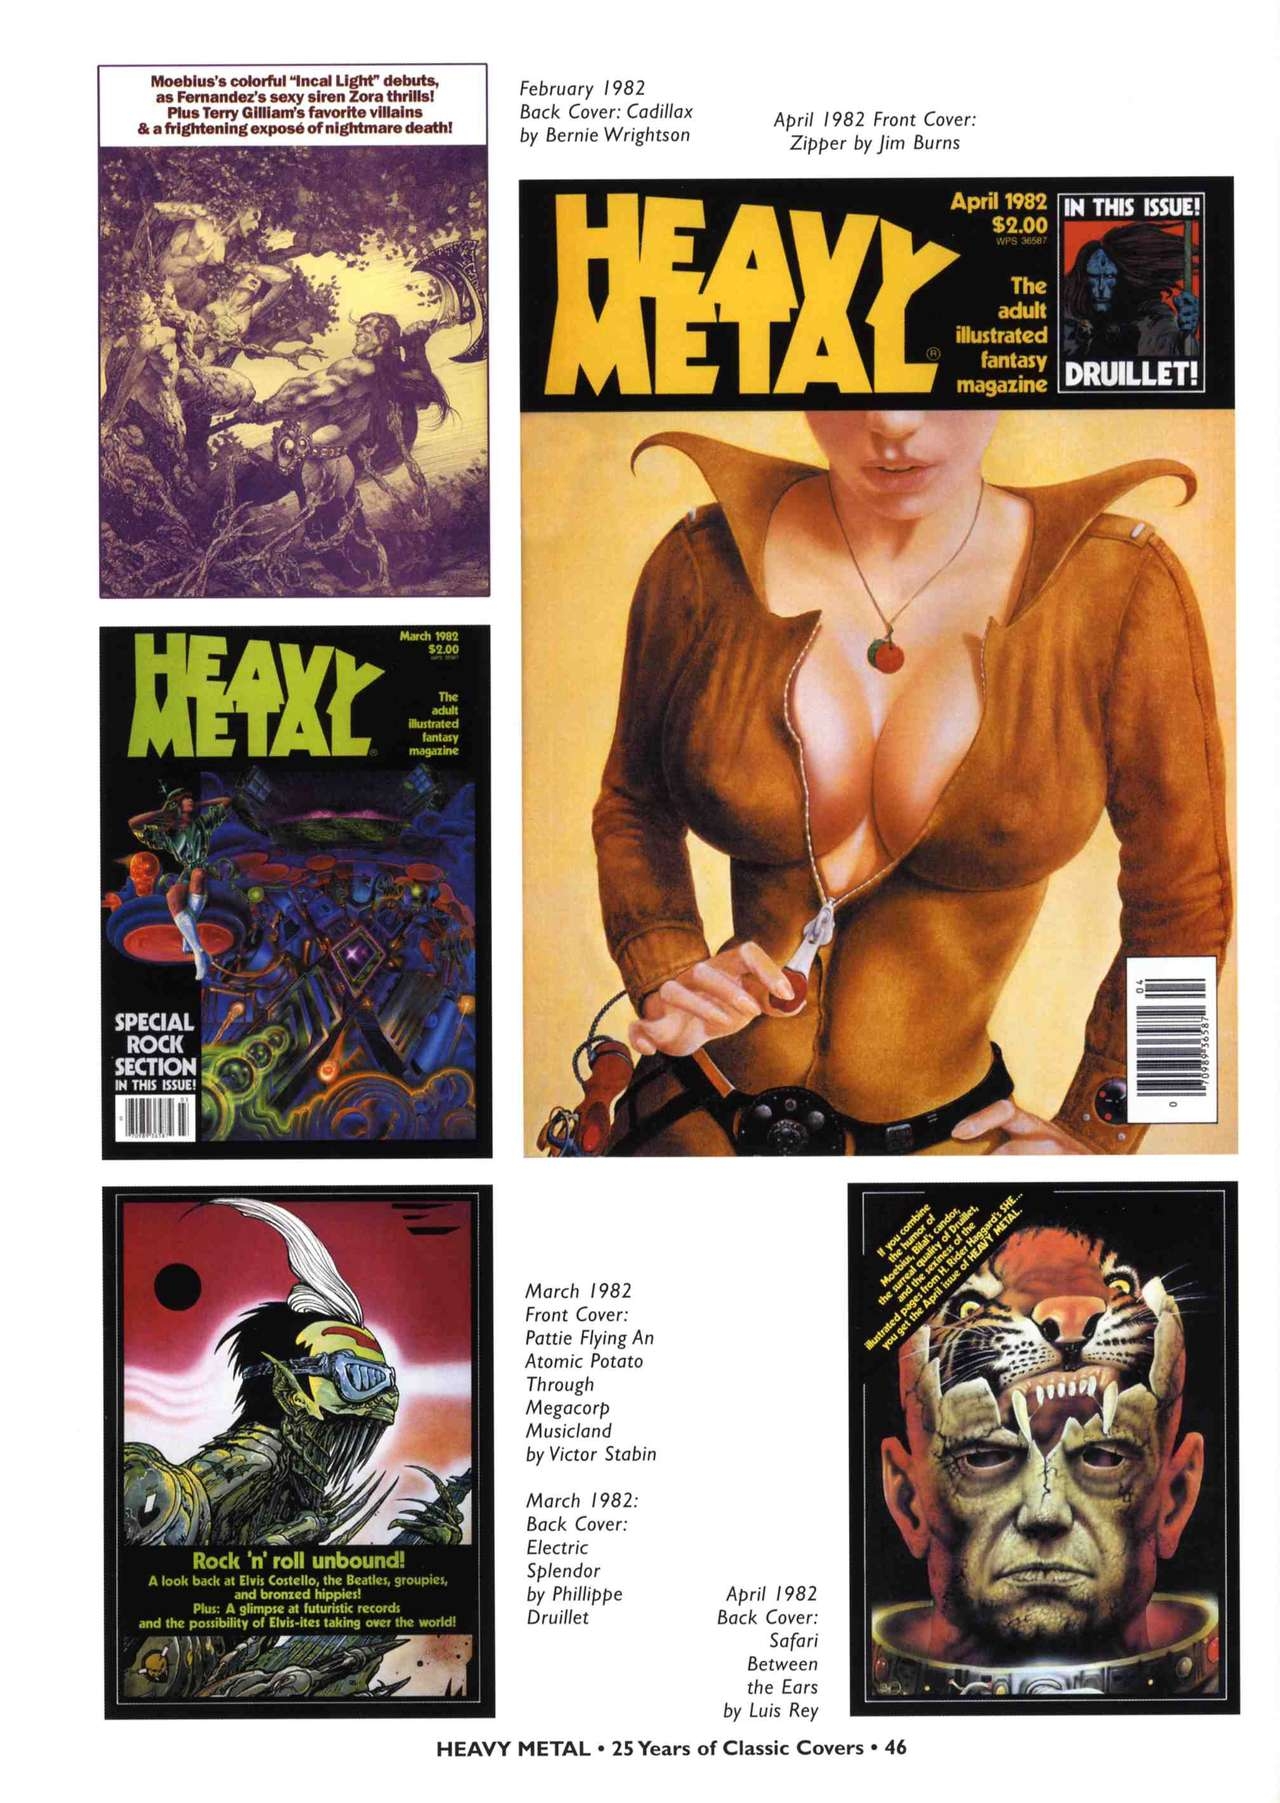 HEAVY METAL 25 Years of Classic Covers 51